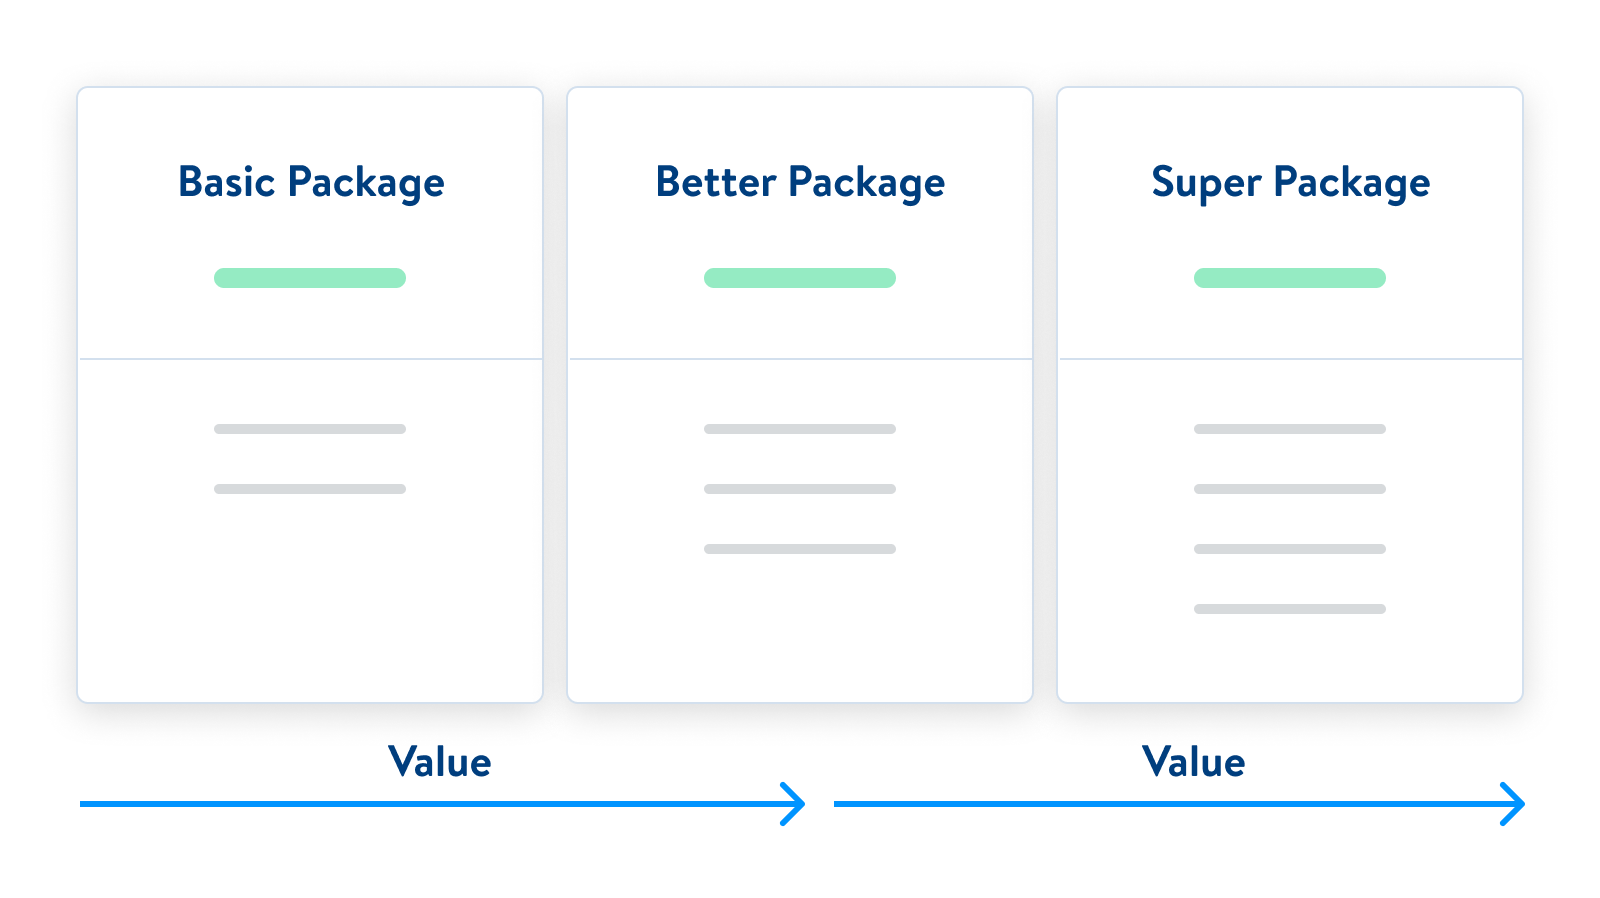 Basic Package > Better Package > Super Package